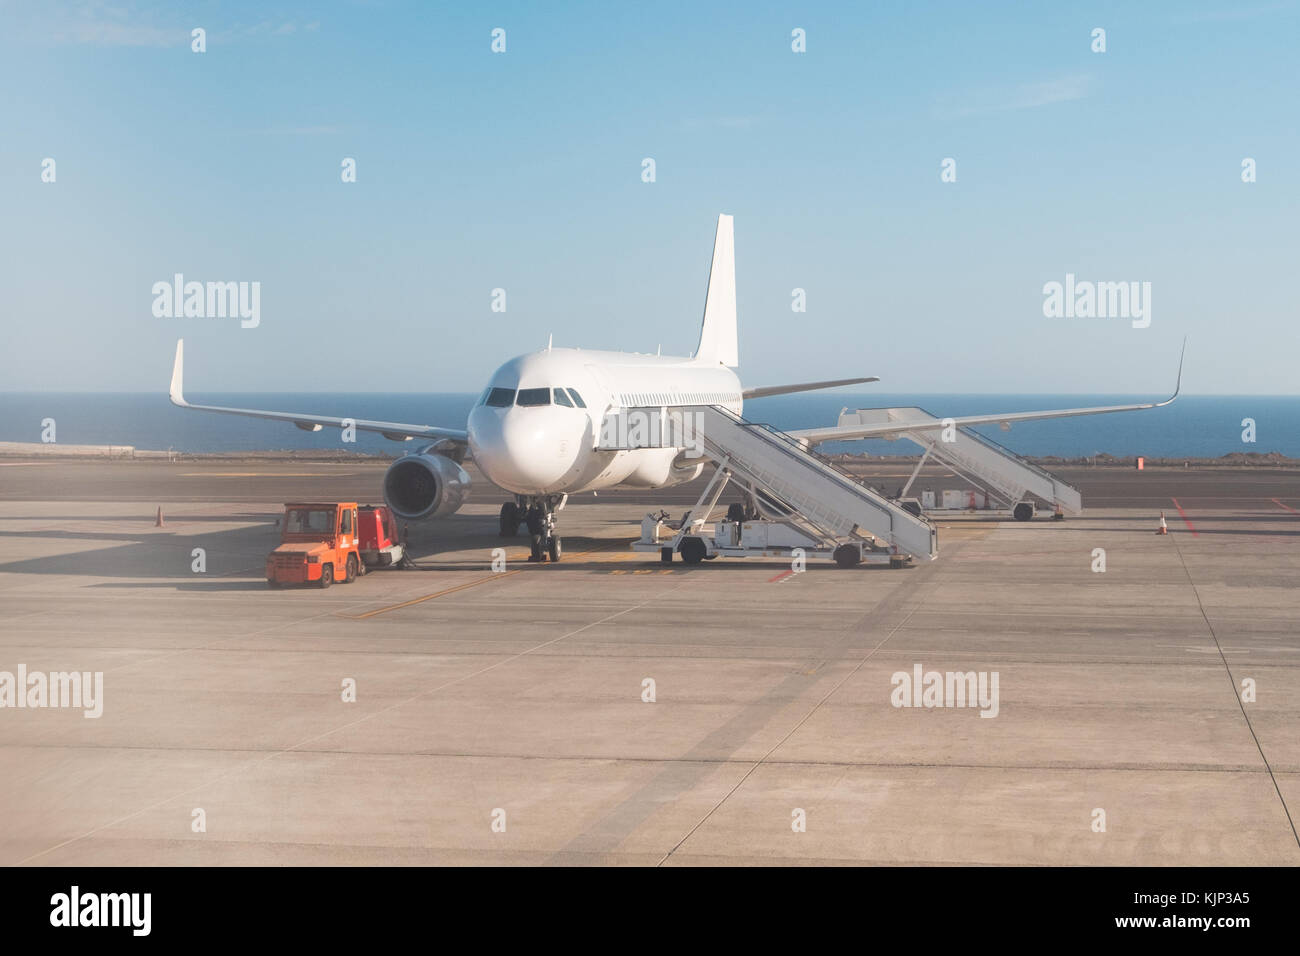 airplane standing on runway with stairs ready for boarding, Stock Photo